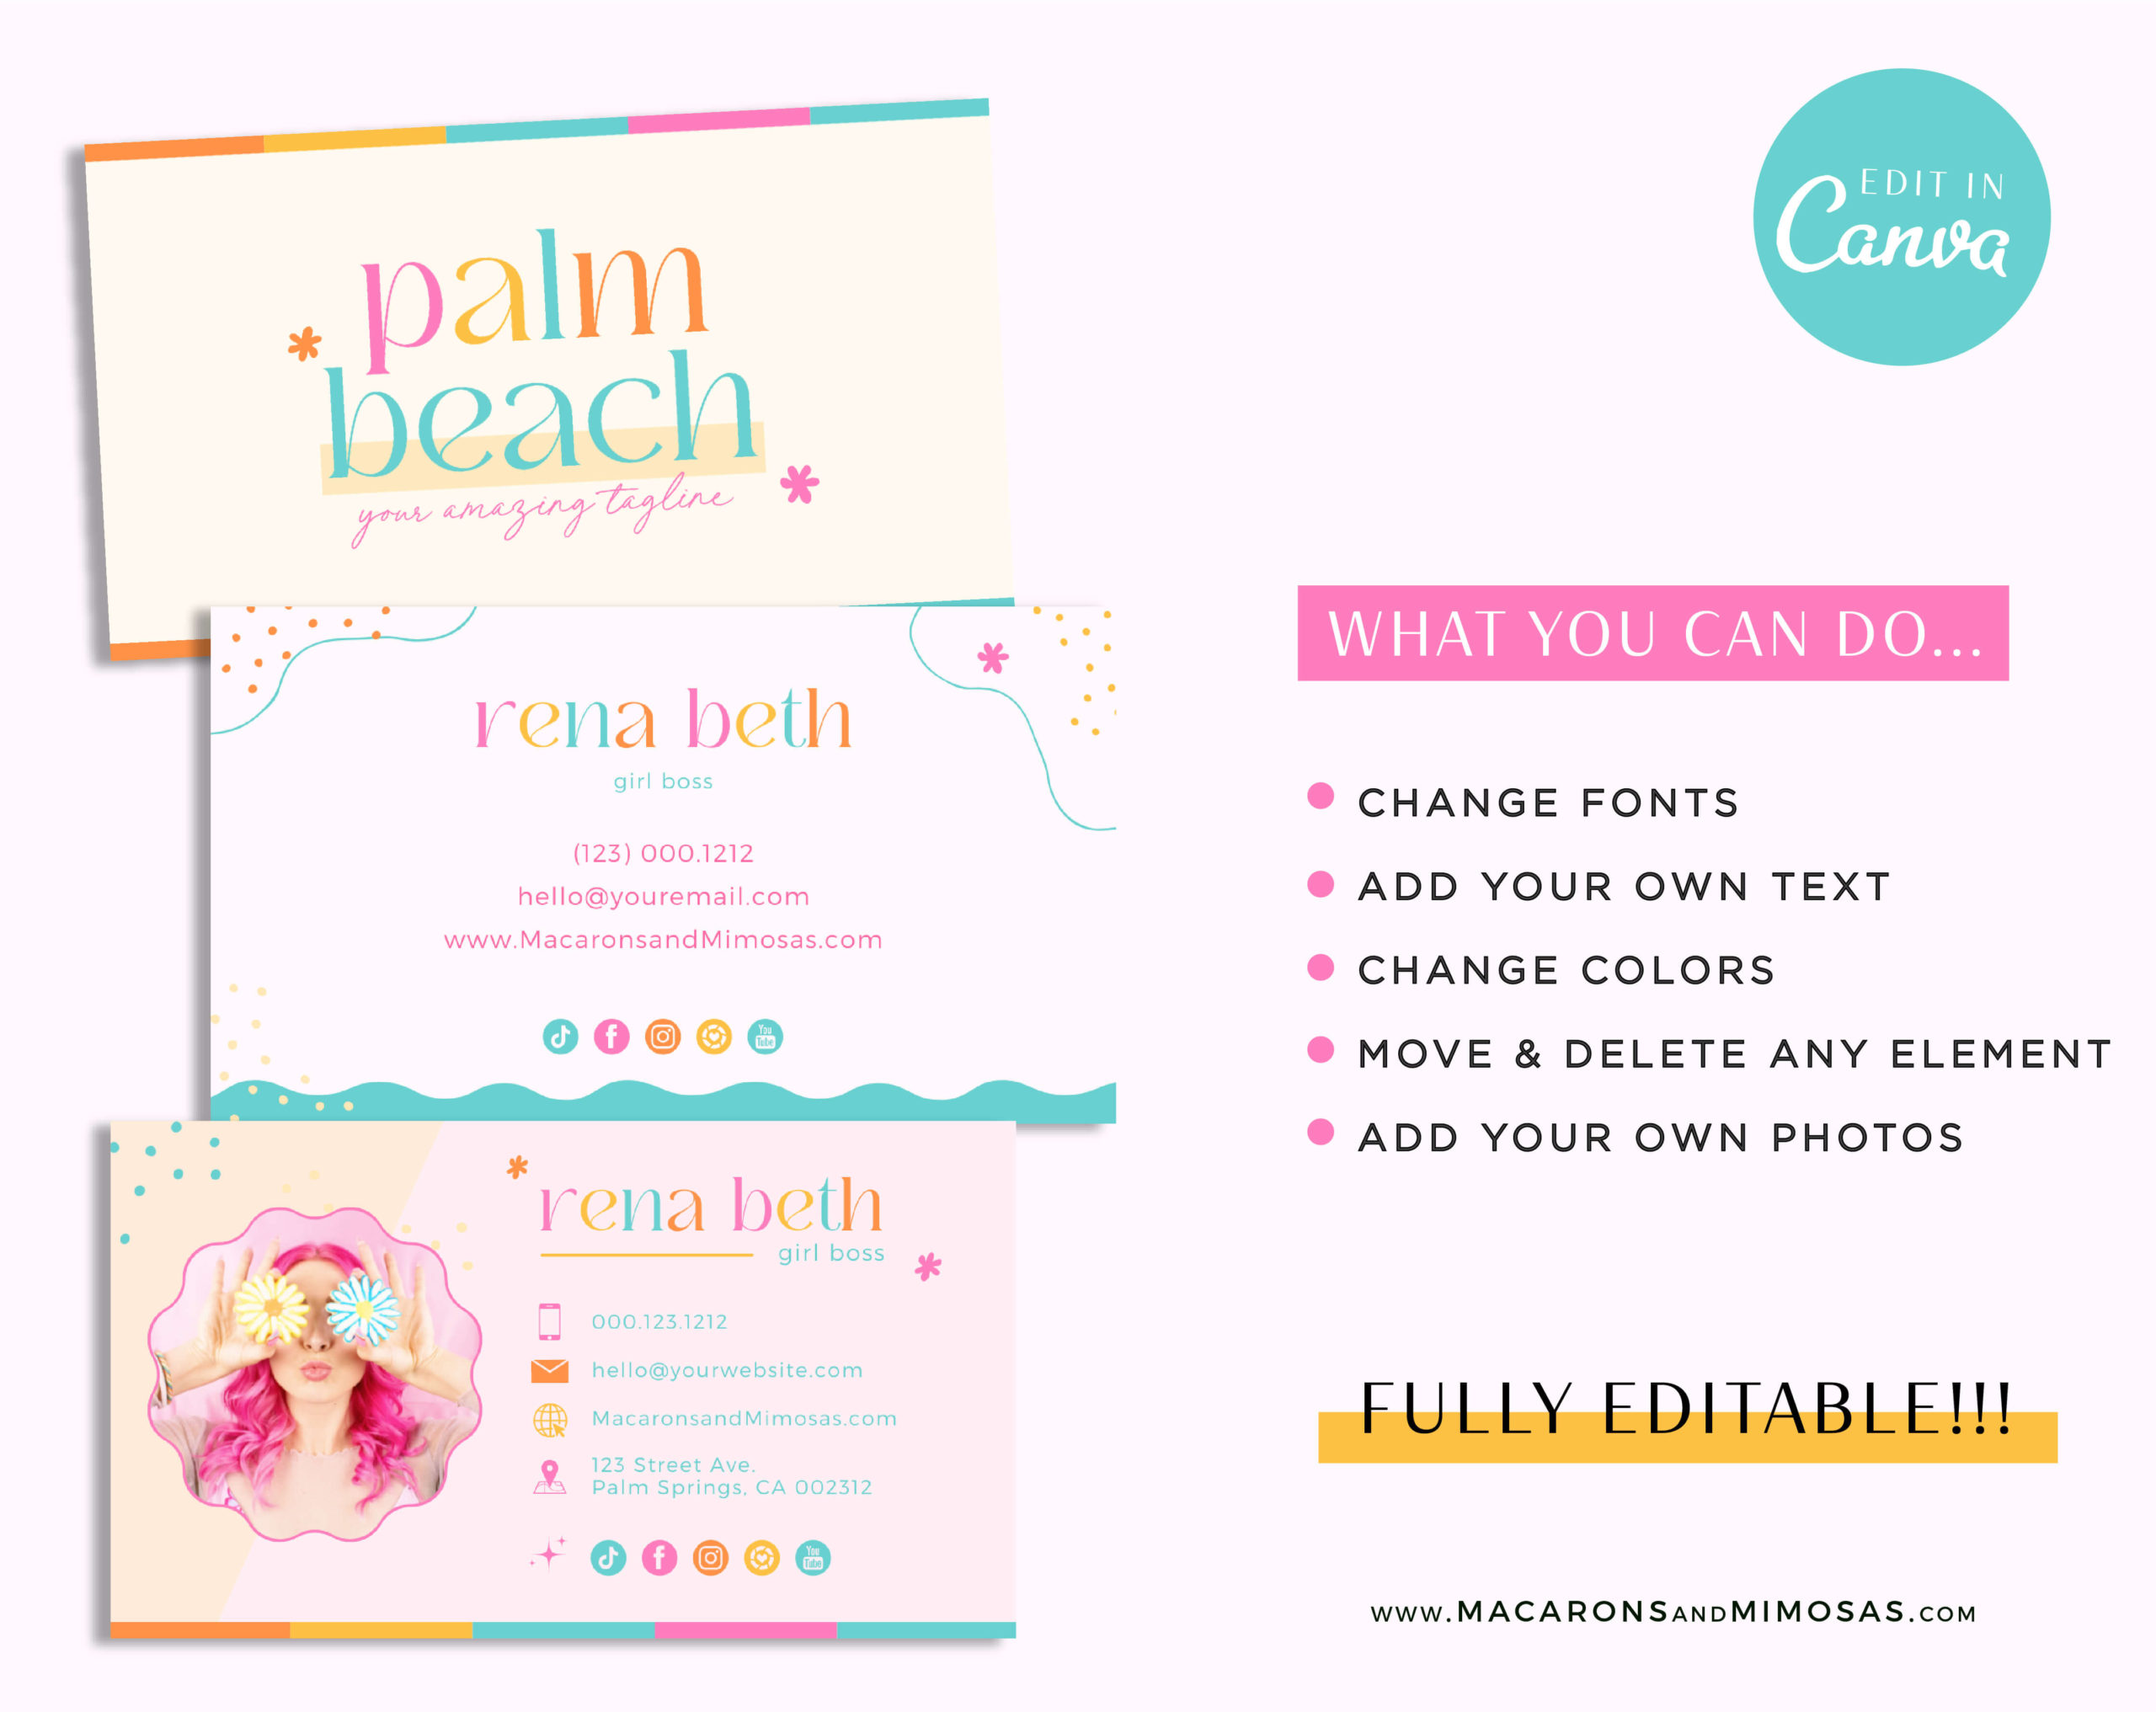 Groovy Retro Business Card Design Template editable in Canva with clickable links, How to create DIY Retro Real Estate Digital Business Card